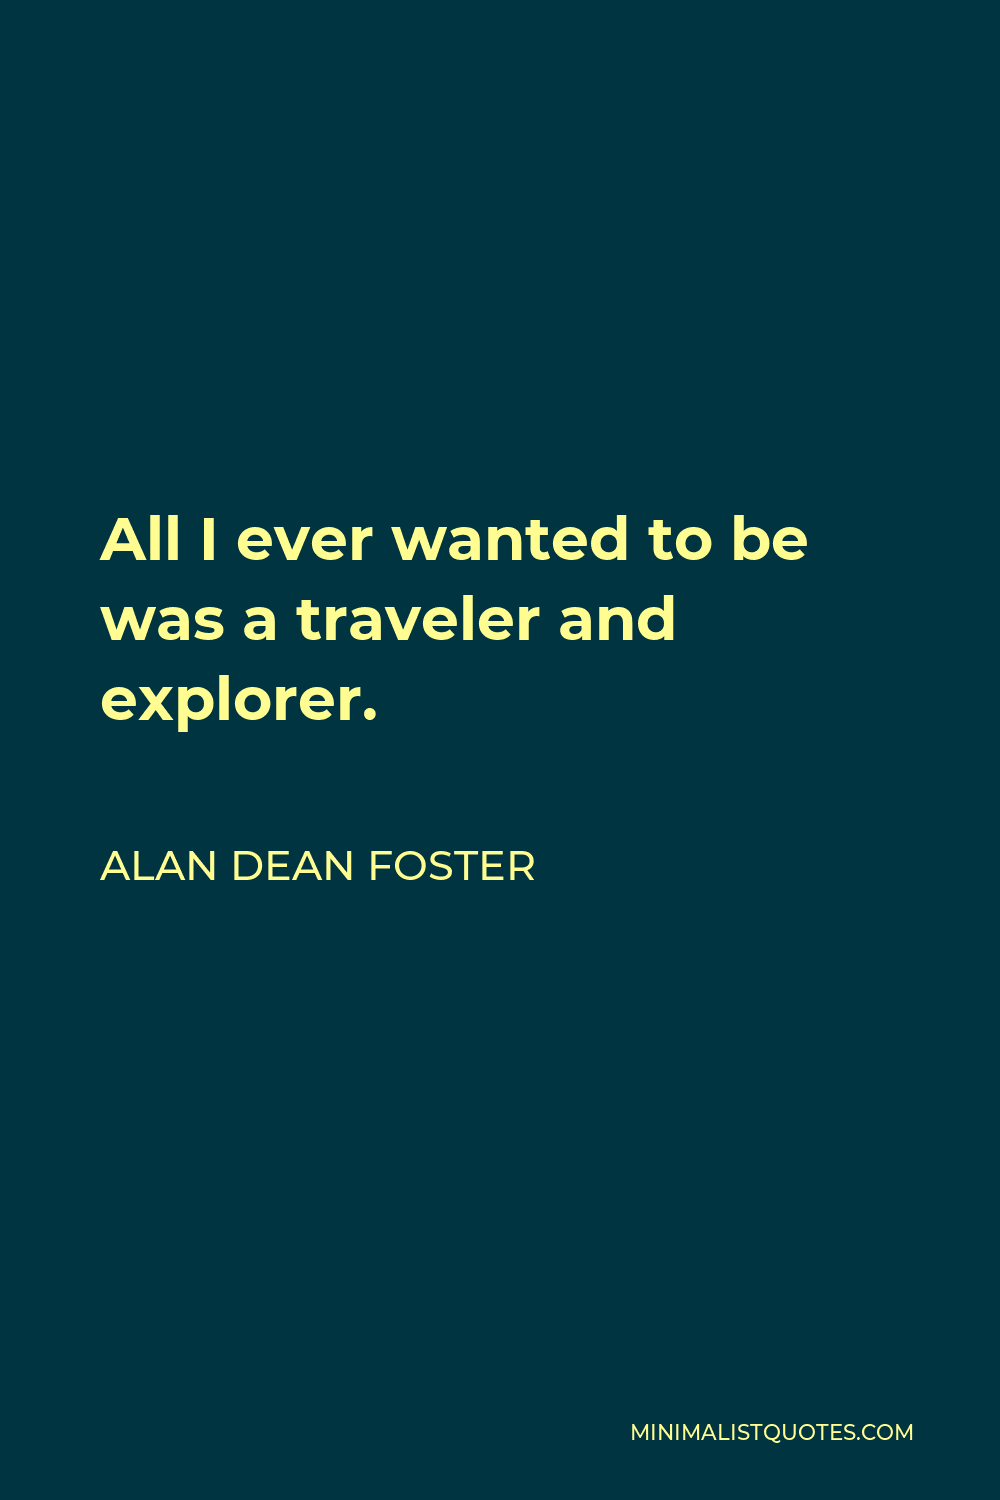 Alan Dean Foster Quote - All I ever wanted to be was a traveler and explorer.